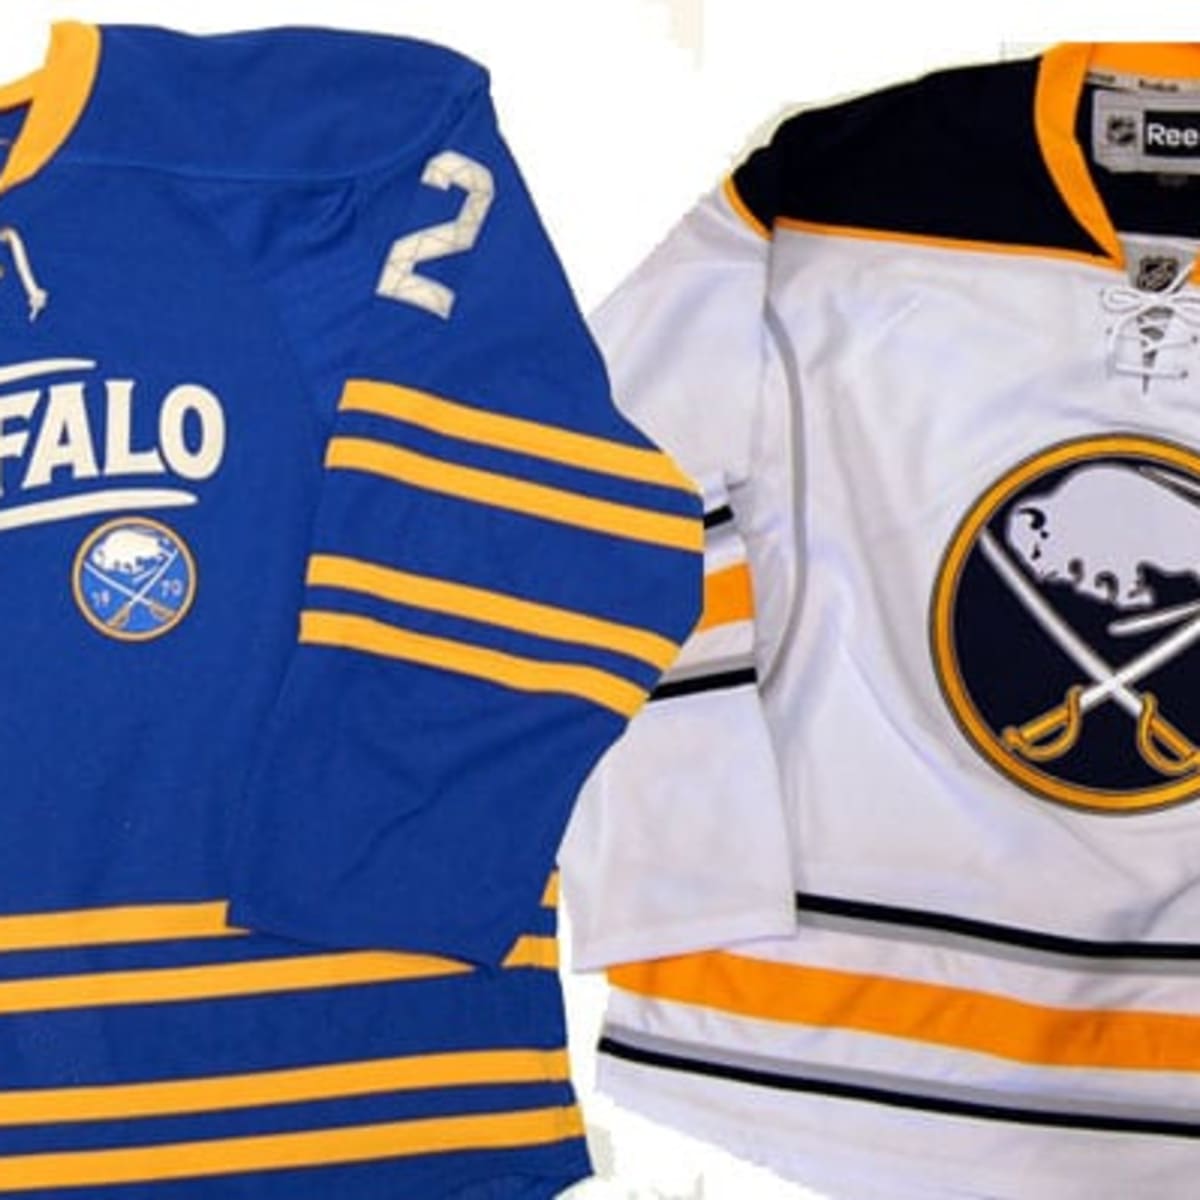 Sabres 40th Anniversary Display by Buffalo Hockey Experience + Museum